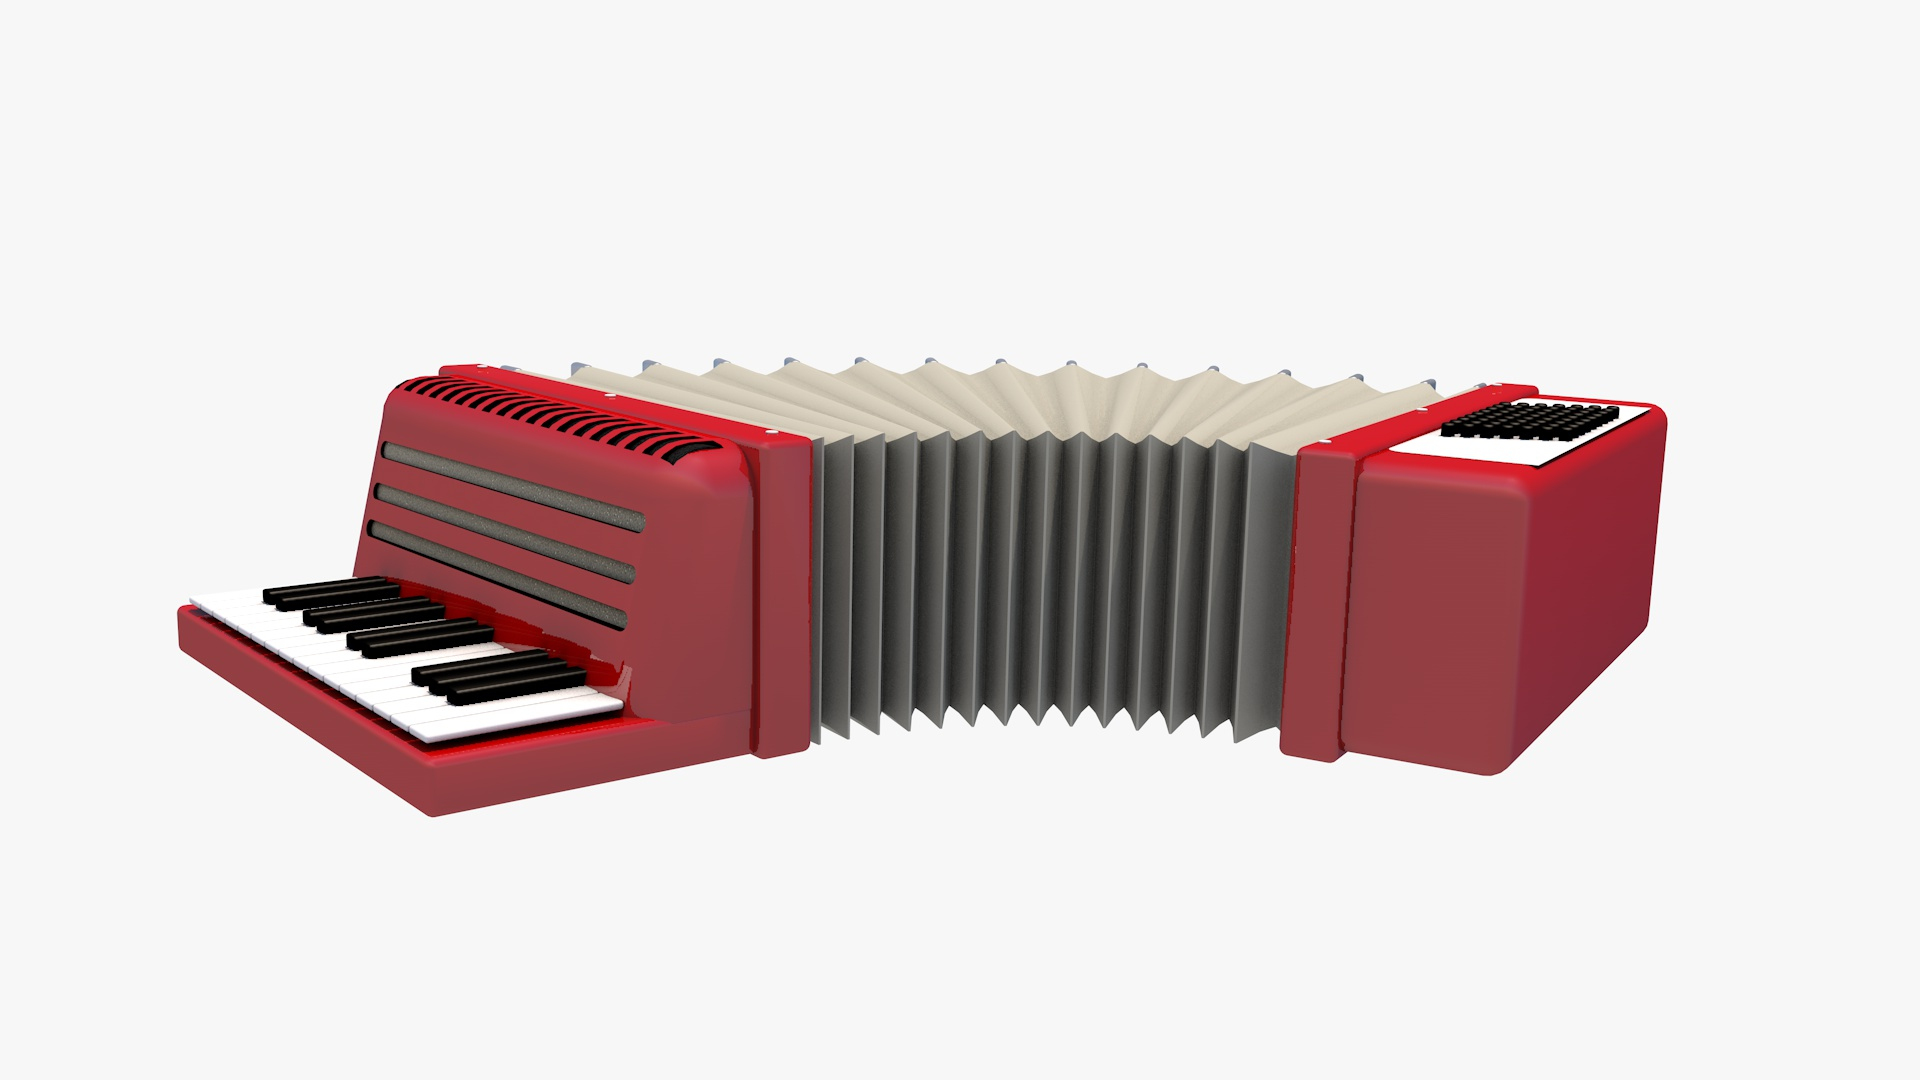 1,033 Toy Accordion Images, Stock Photos, 3D objects, & Vectors